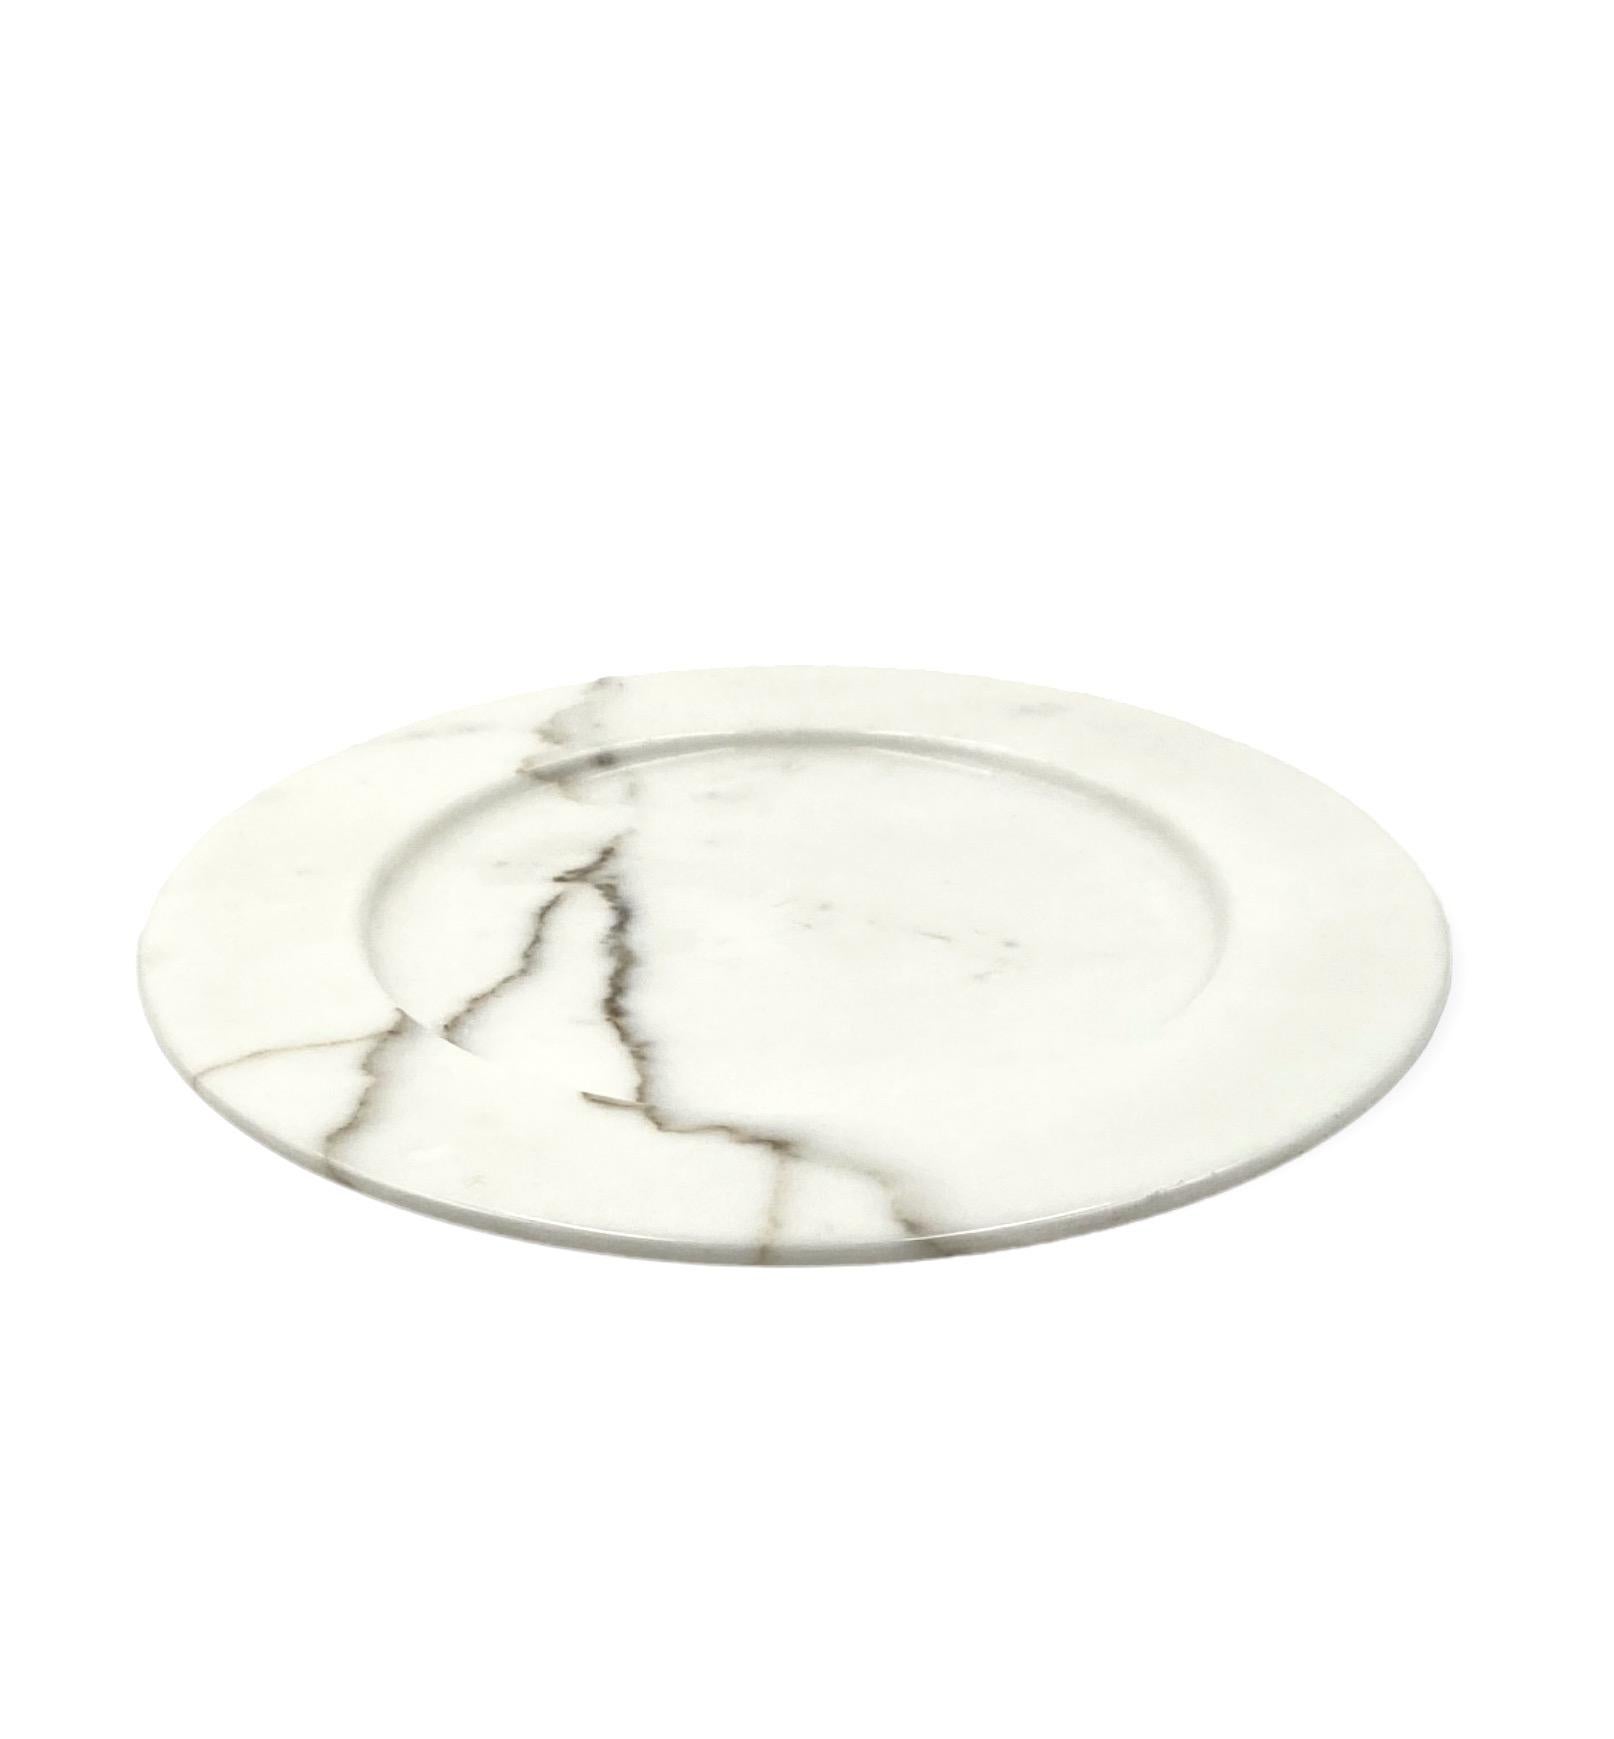 Marble White Carrara marble centerpiece / plate, Up&Up Italy, 1970s For Sale